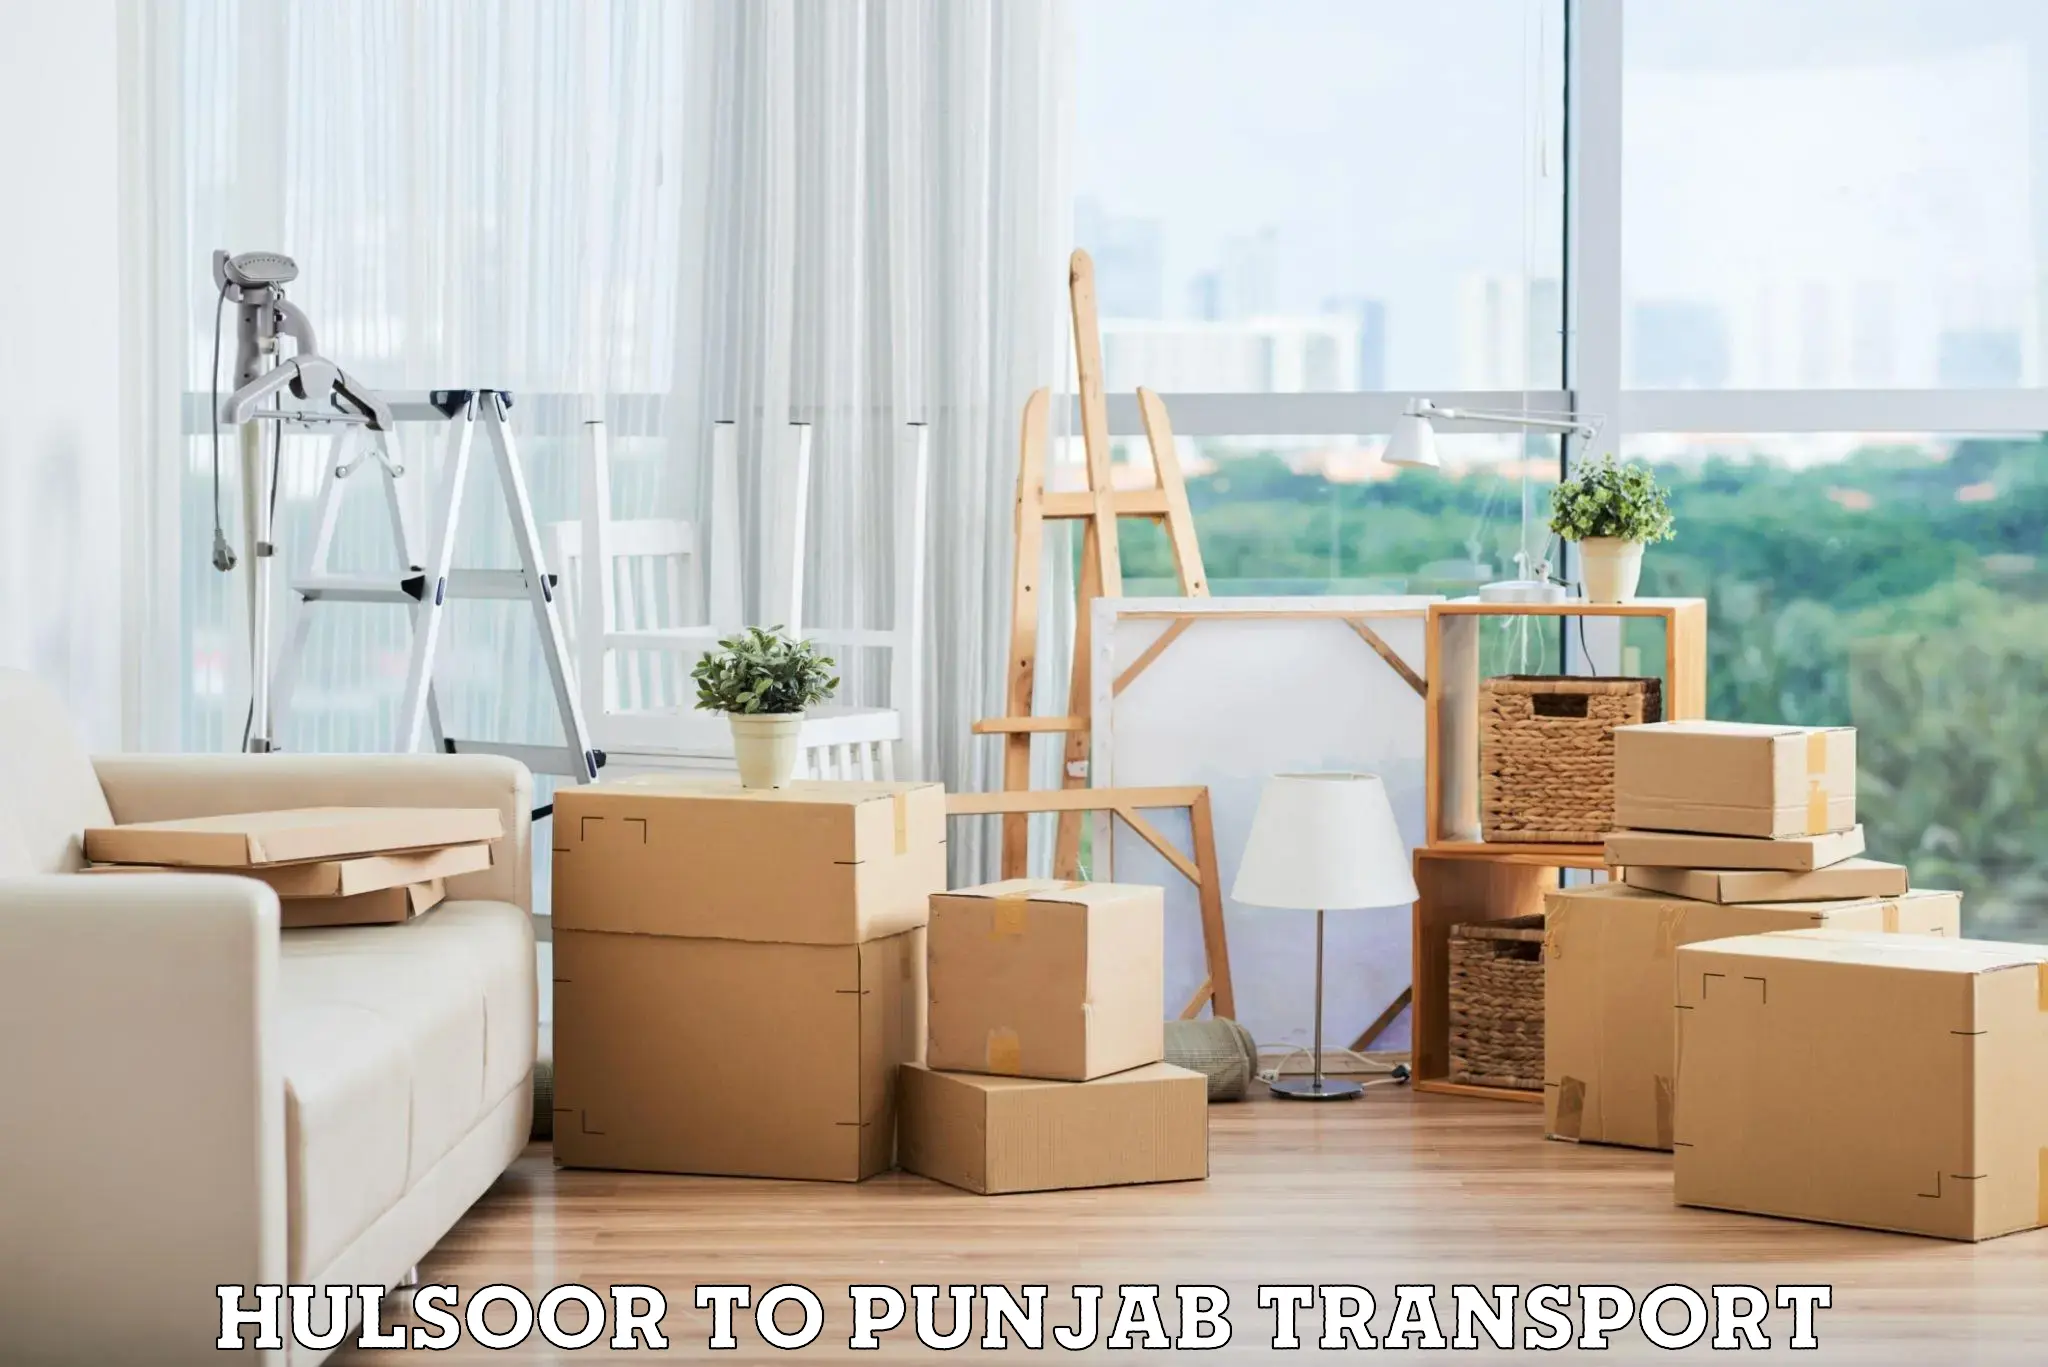 Commercial transport service Hulsoor to Punjab